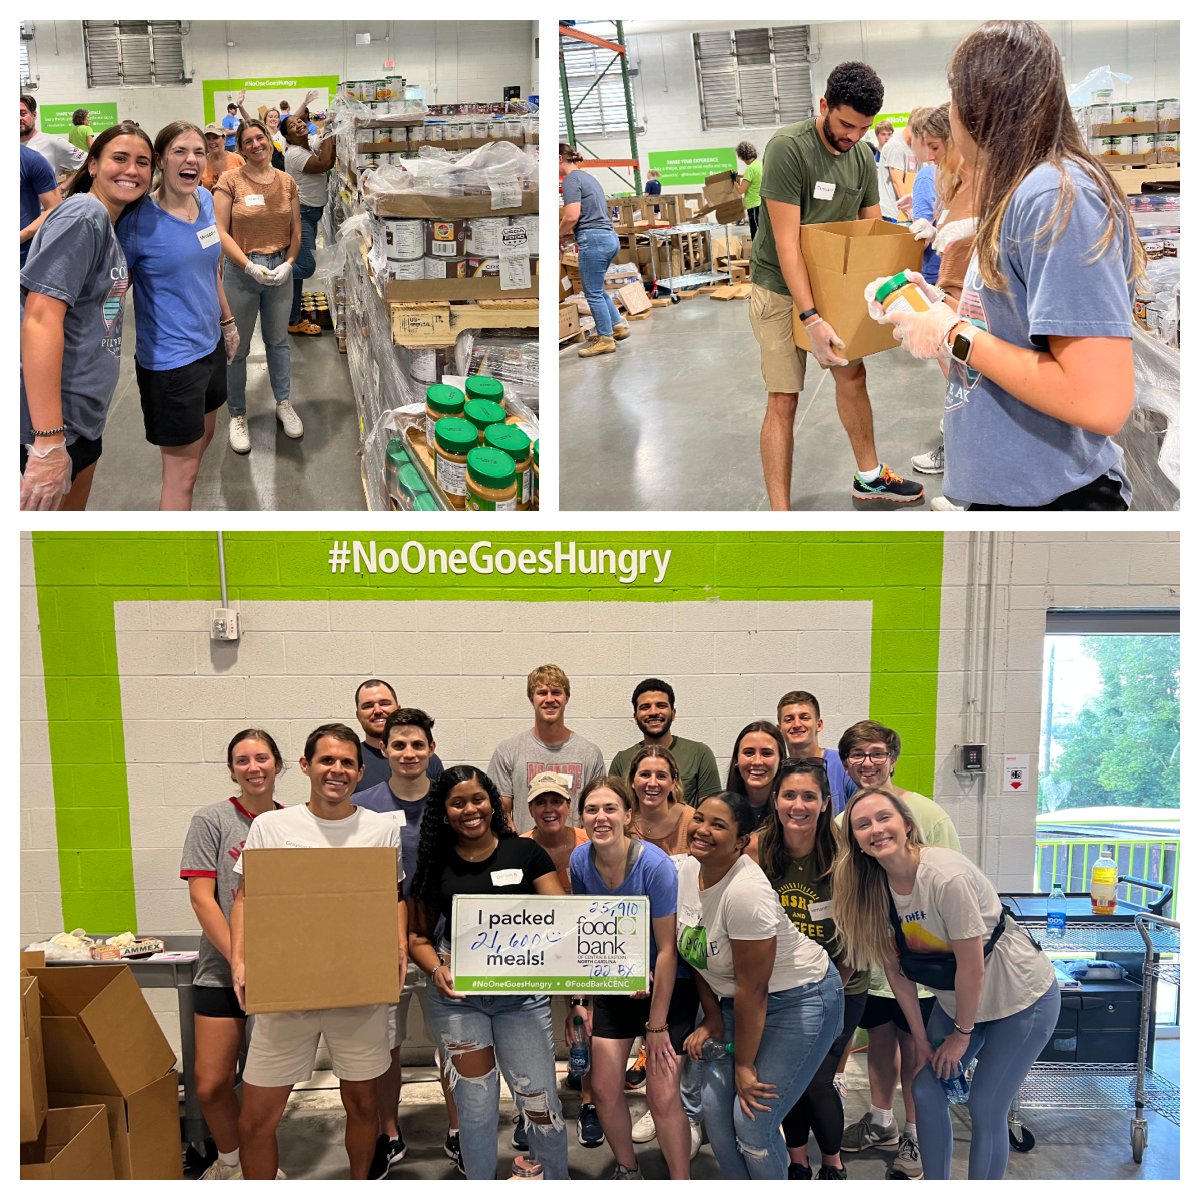 The Financial Symmetry Team recently volunteered at the @FoodBankCENC! Together we helped pack 21,600 meals. #NoOneGoesHungry